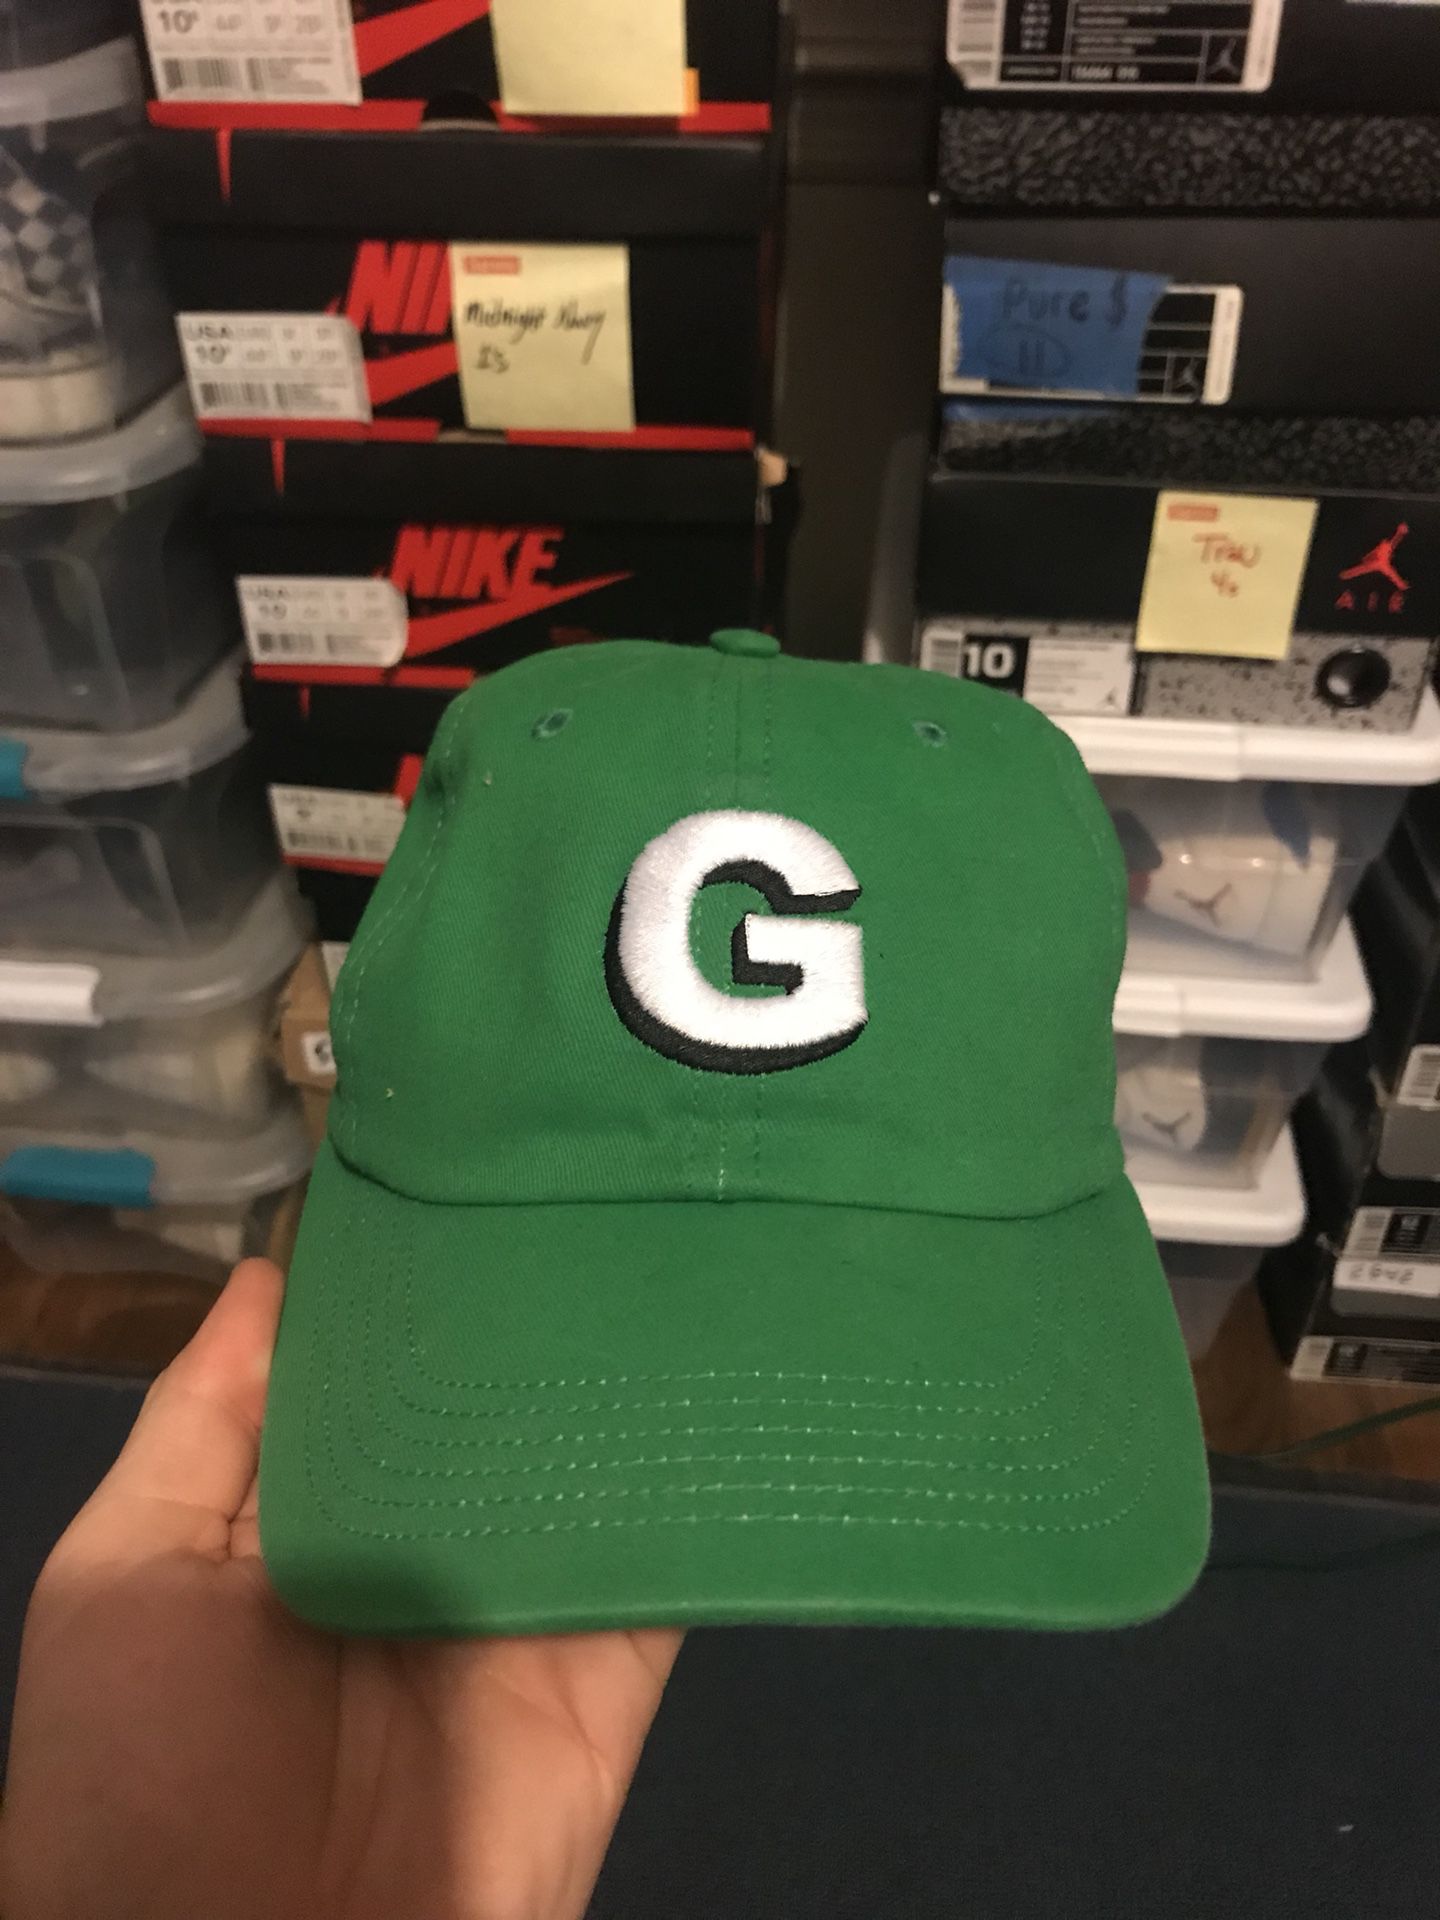 Forespørgsel værdig fodbold Old GOLF WANG Tyler the creator hat for Sale in Fairfield, CT - OfferUp